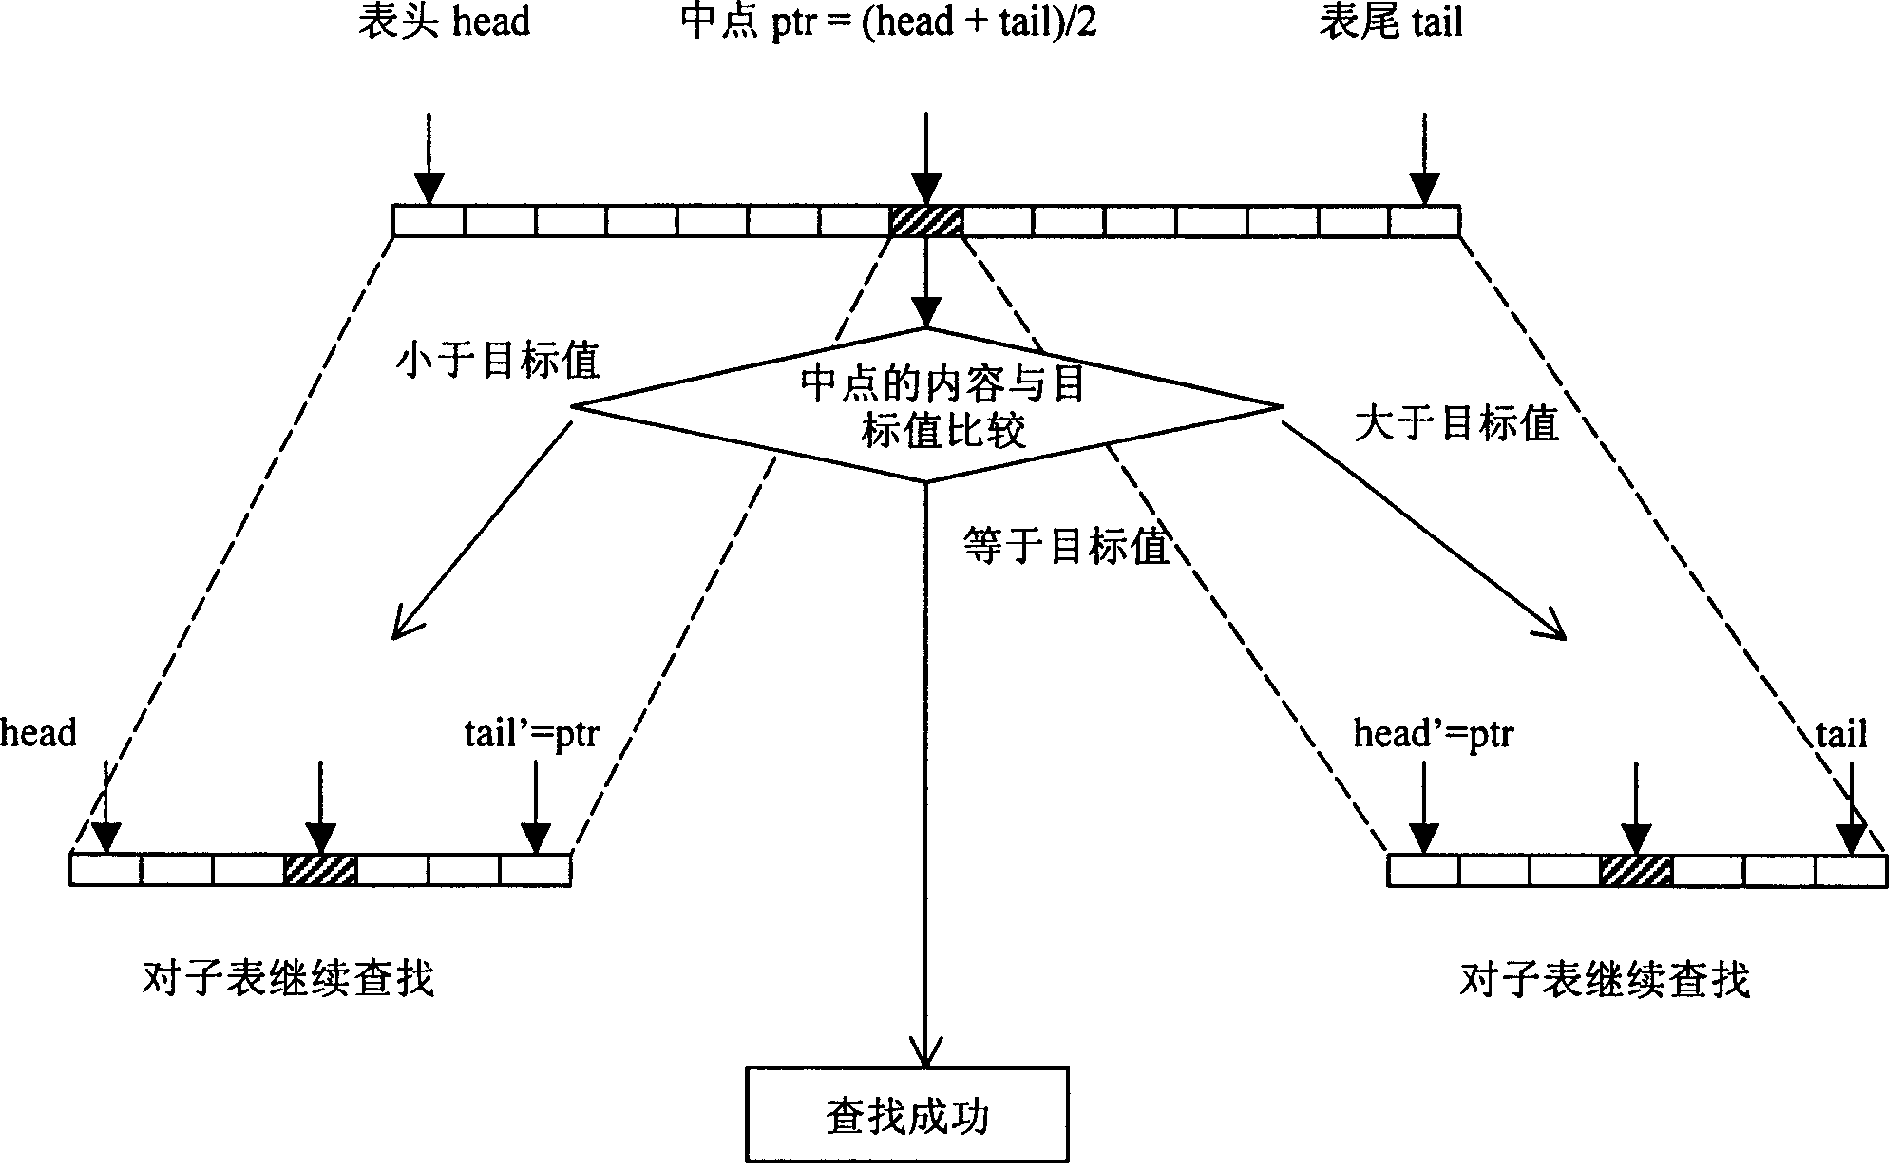 Binary chop type task dispatching method for embedding real-time operating system